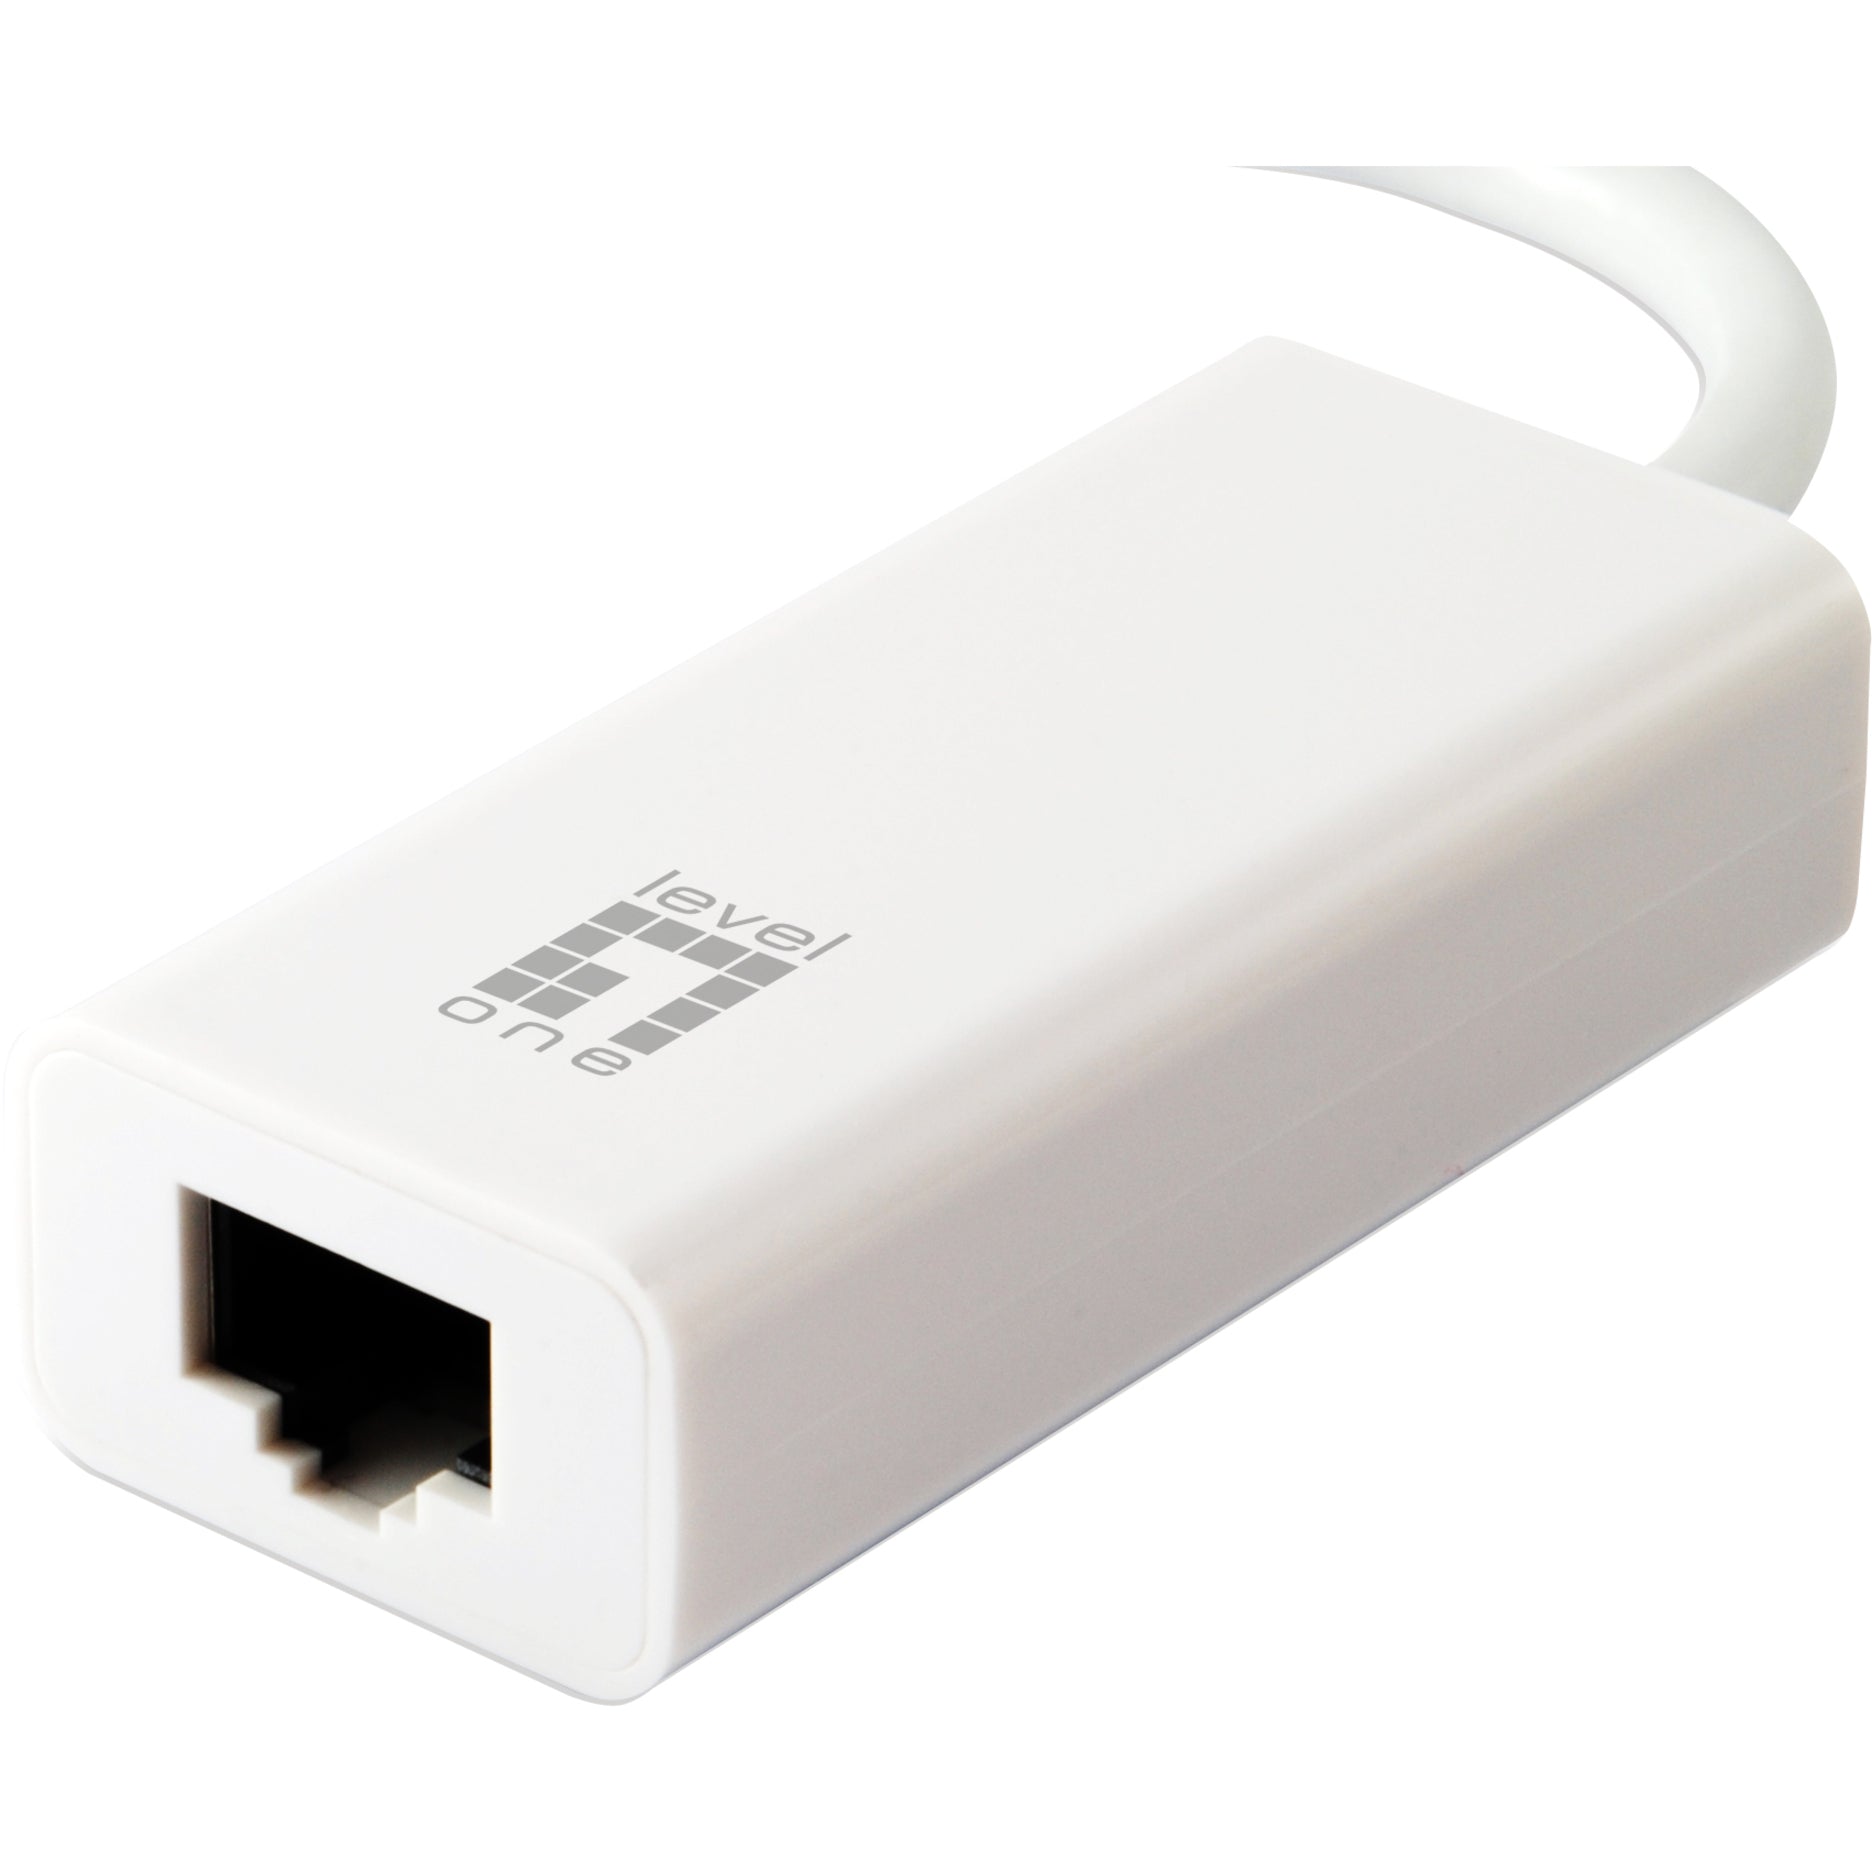 LevelOne USB-0401 USB to Gigabit Ethernet Adapter Windows/MAC, Fast and Reliable Network Connection